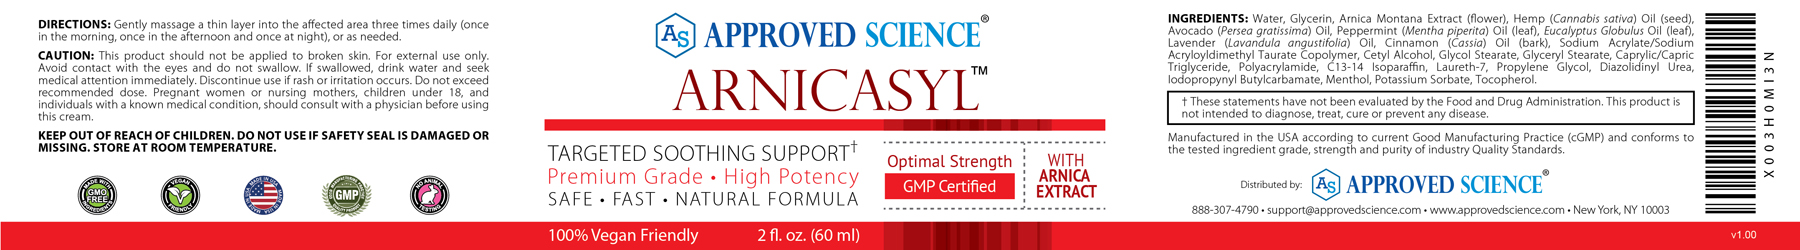 Arnicasyl™ Supplement Facts